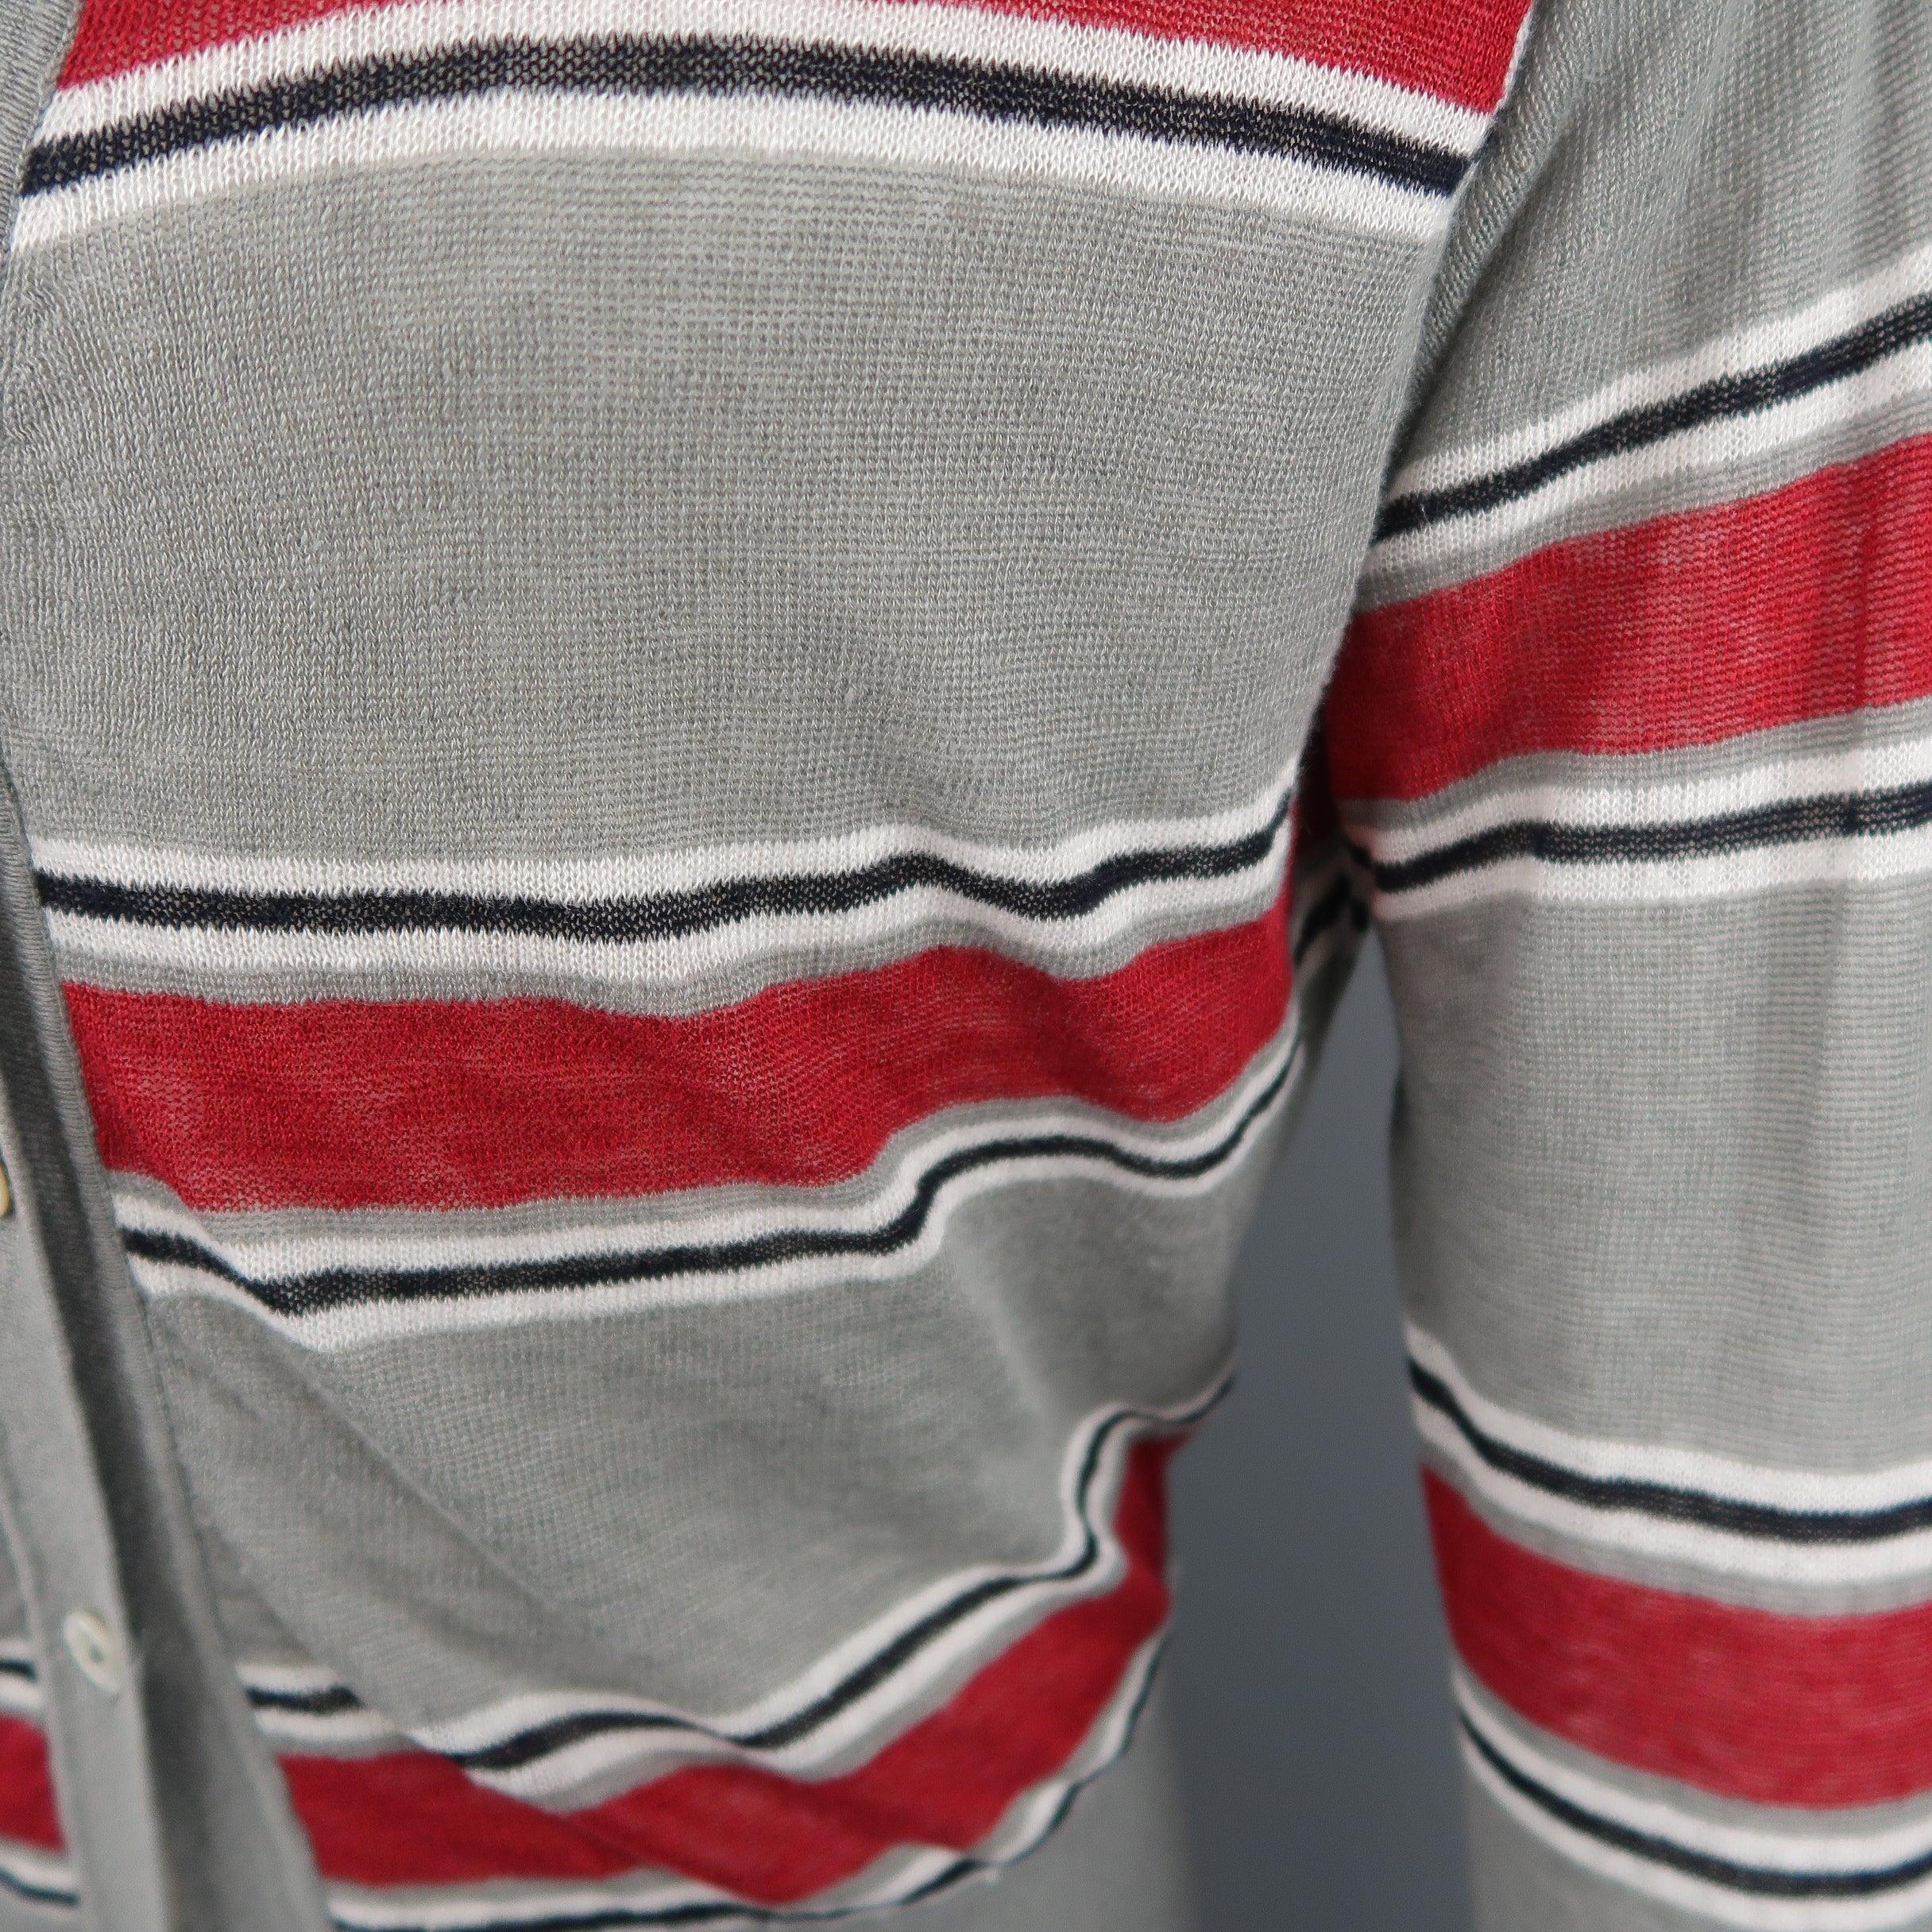 BLACK FLEECE Size S Gray & Stripe Cotton  White Mesh Reversible Cardigan In Excellent Condition For Sale In San Francisco, CA